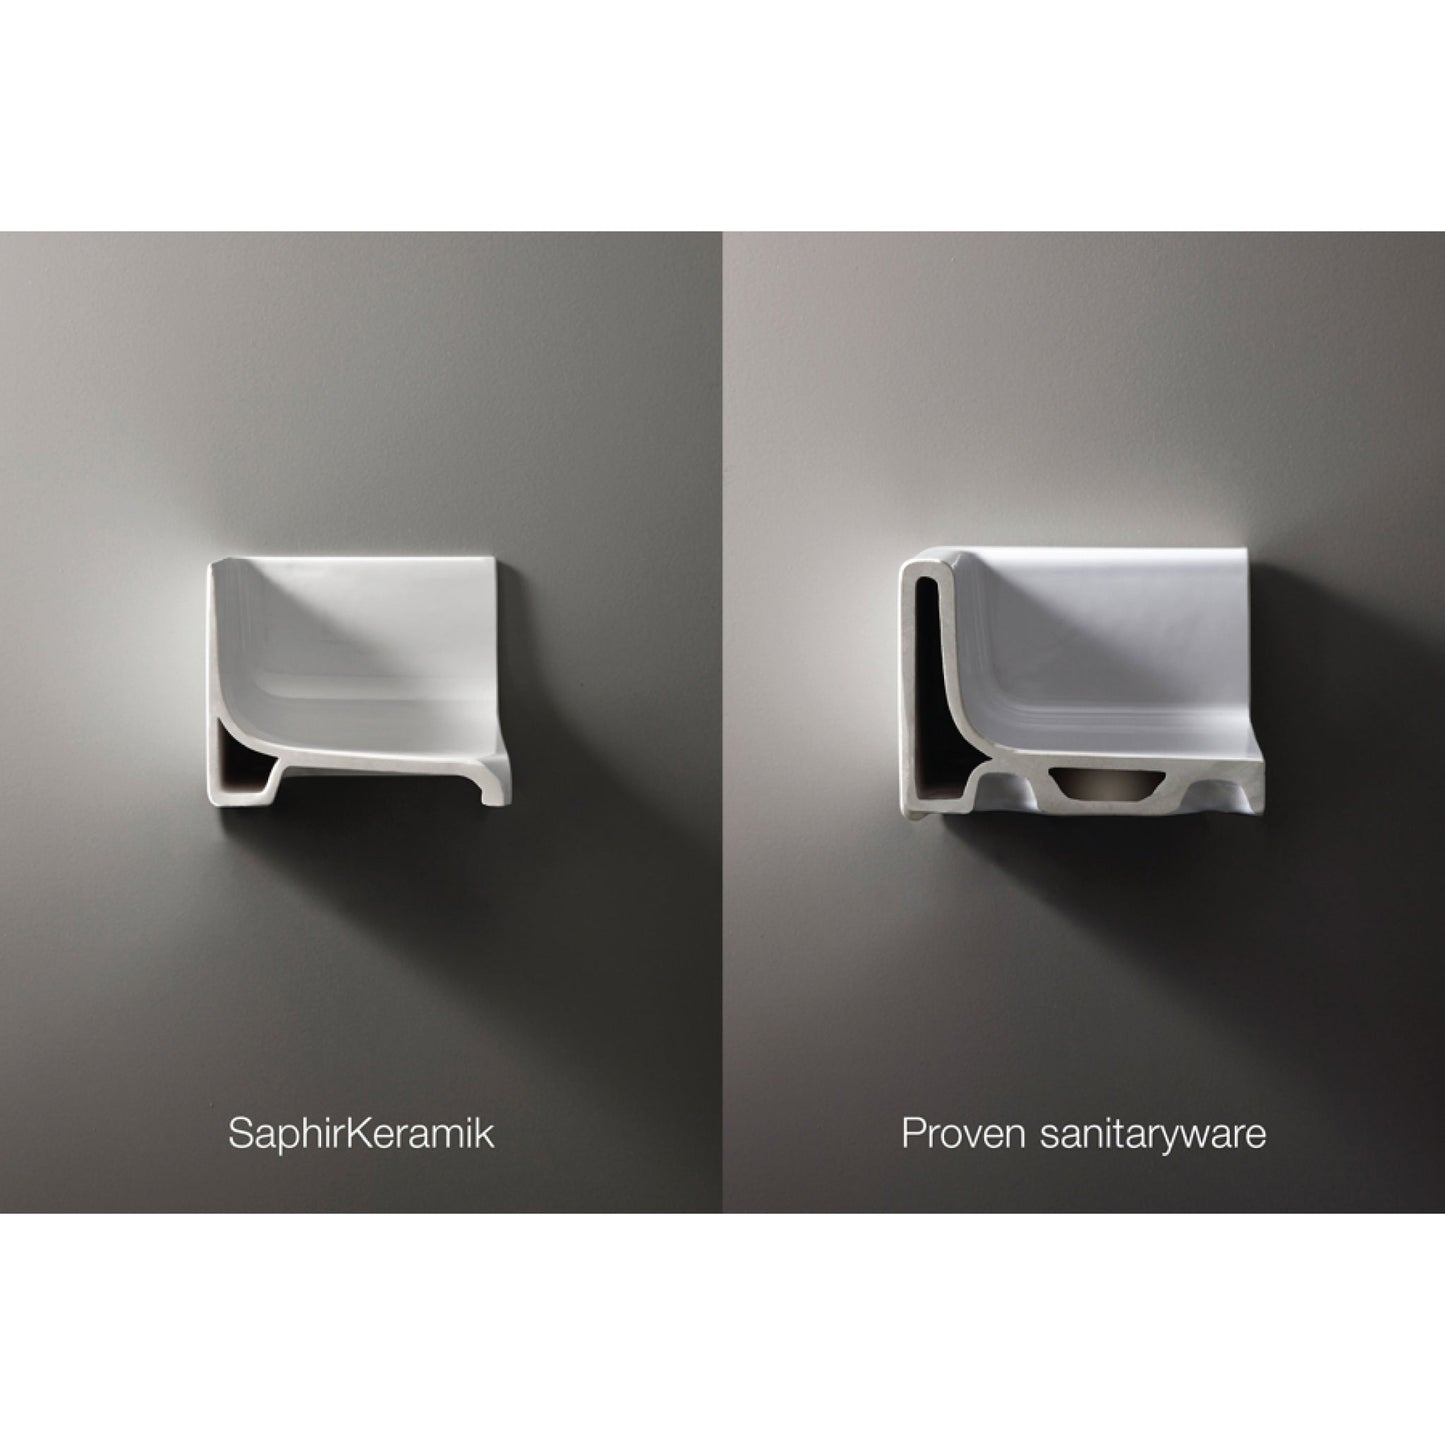 Laufen Val 22" x 12" Matte Black Wall-Mounted Shelf-Left Bathroom Sink With Faucet Hole on the Right